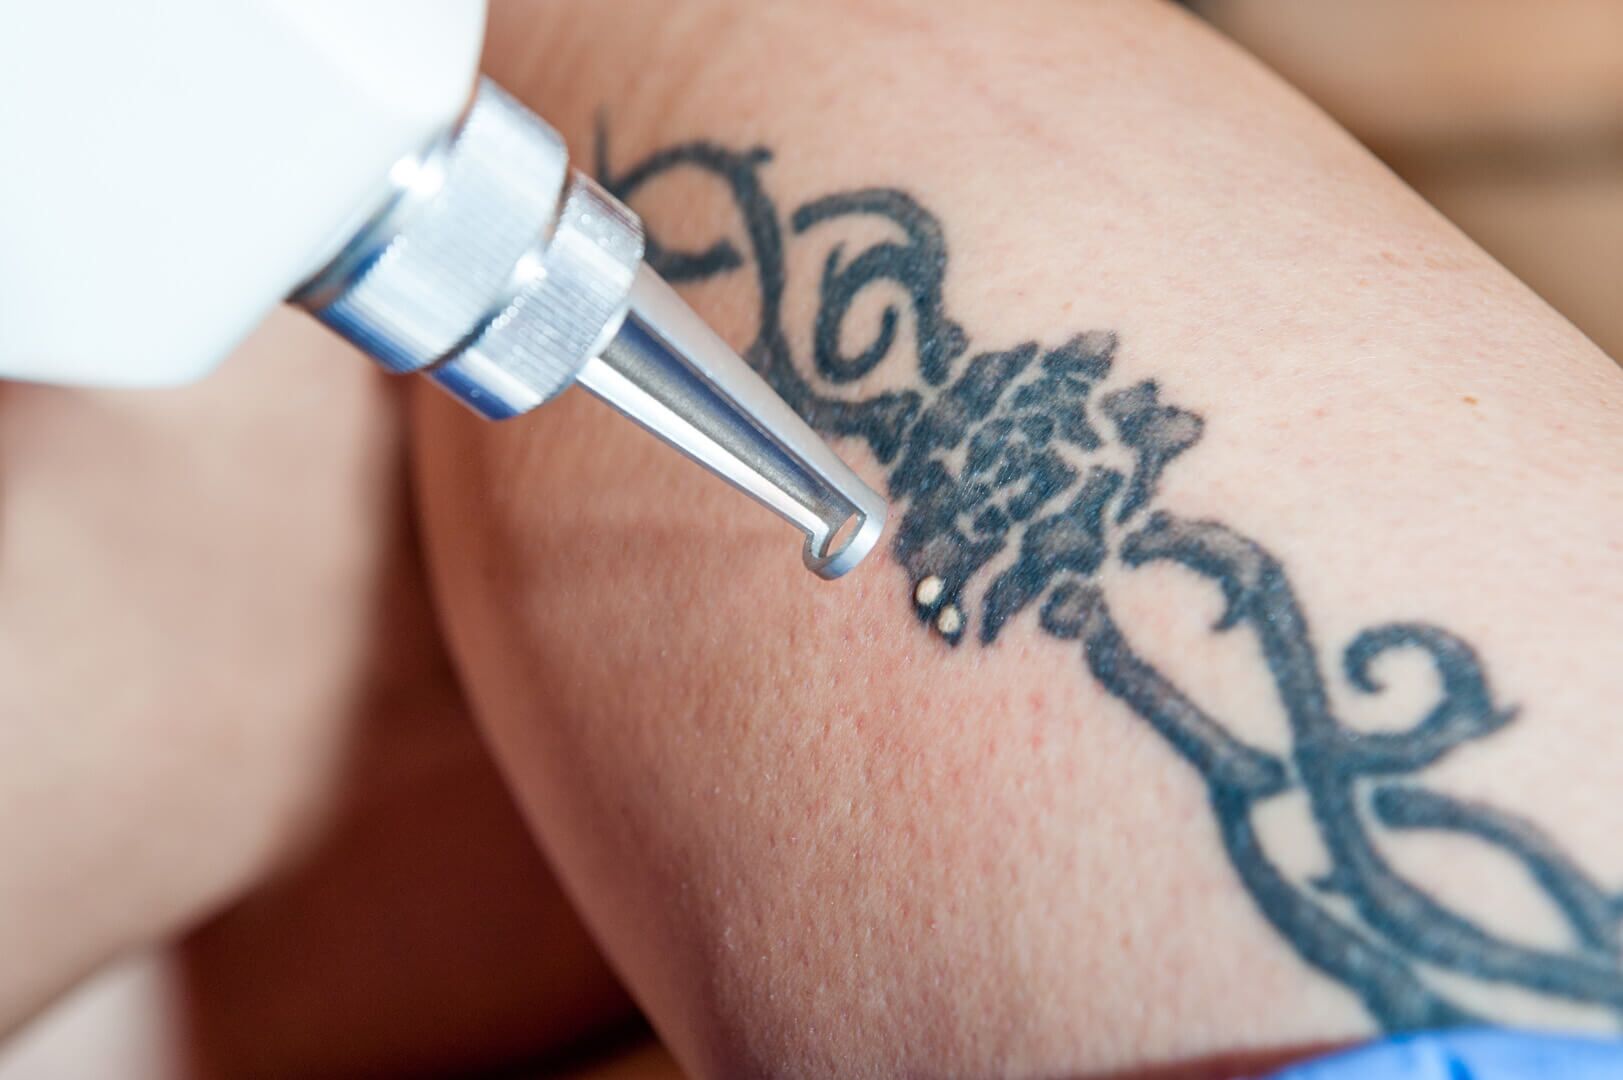 Tattoo Removal is Easier Than Ever with RevLite